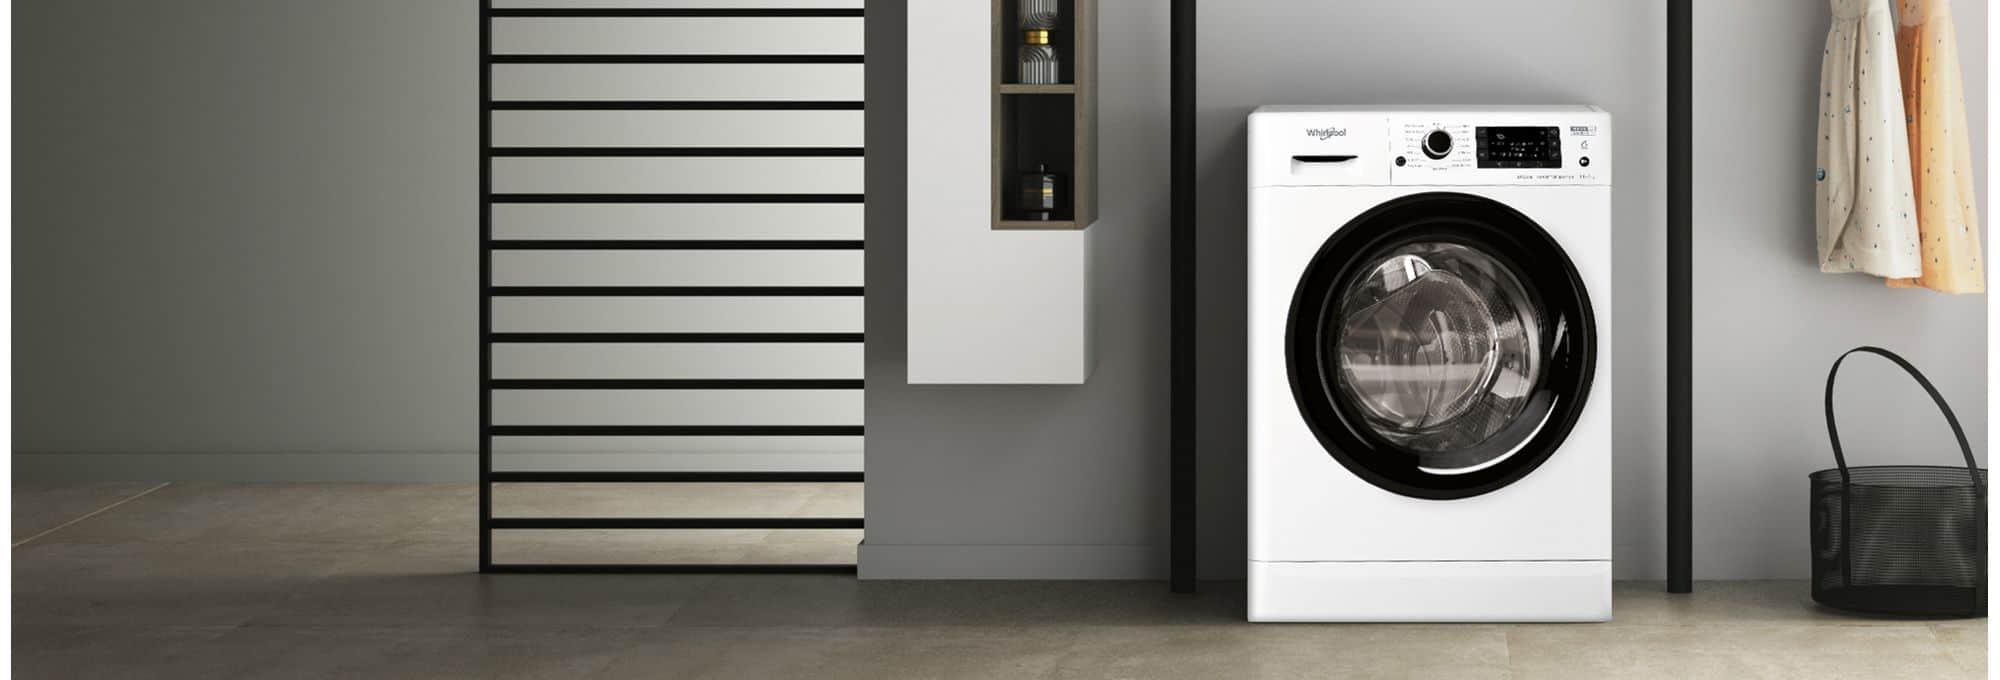 washing machine fully automatic home appliance 